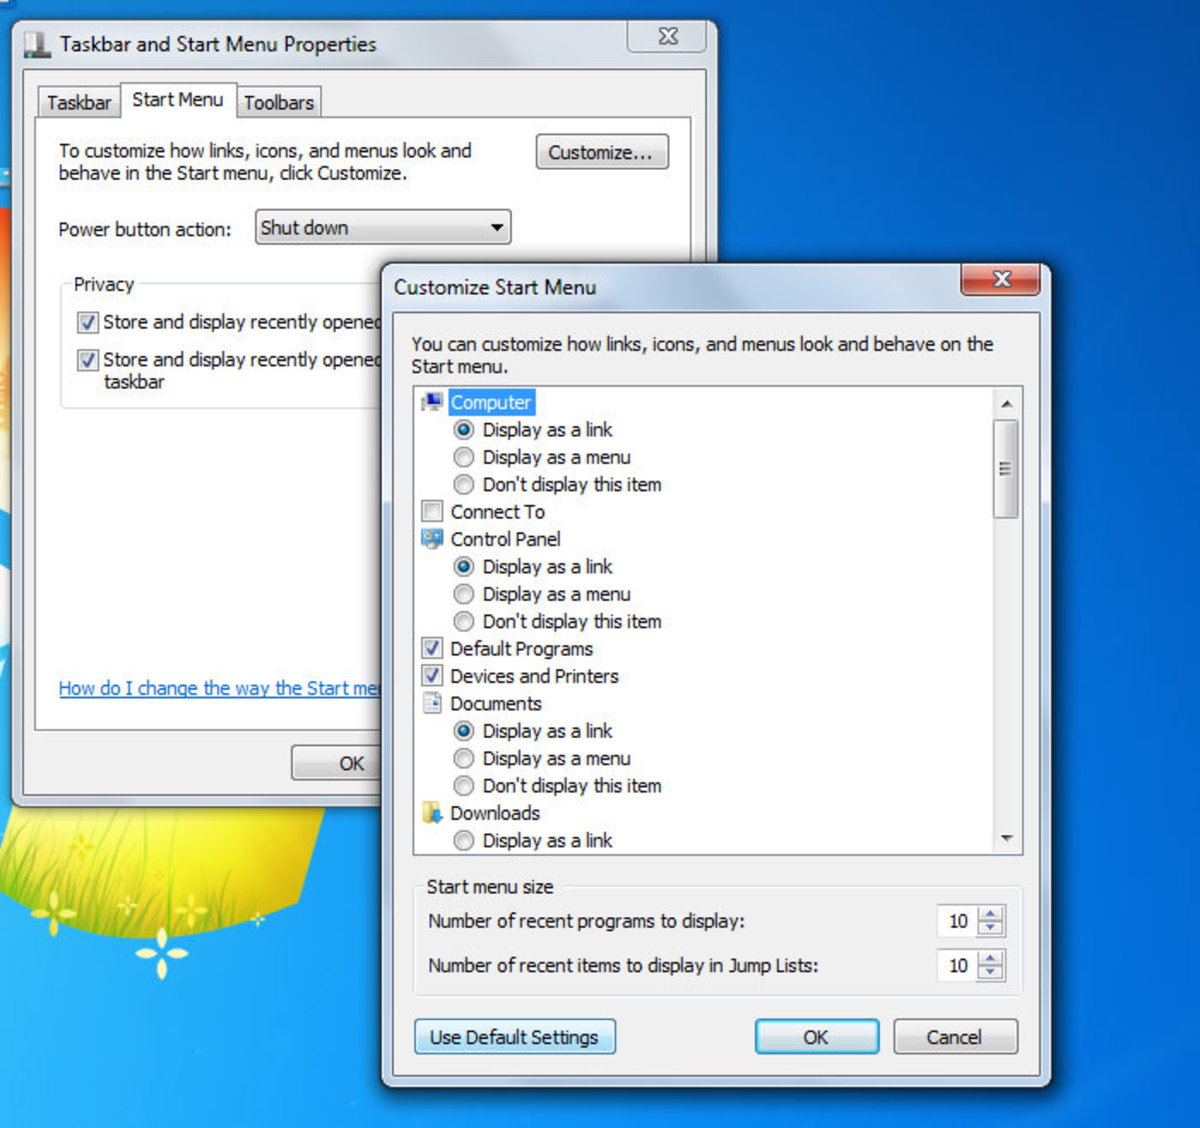 how-to-fix-windows-7-search-index